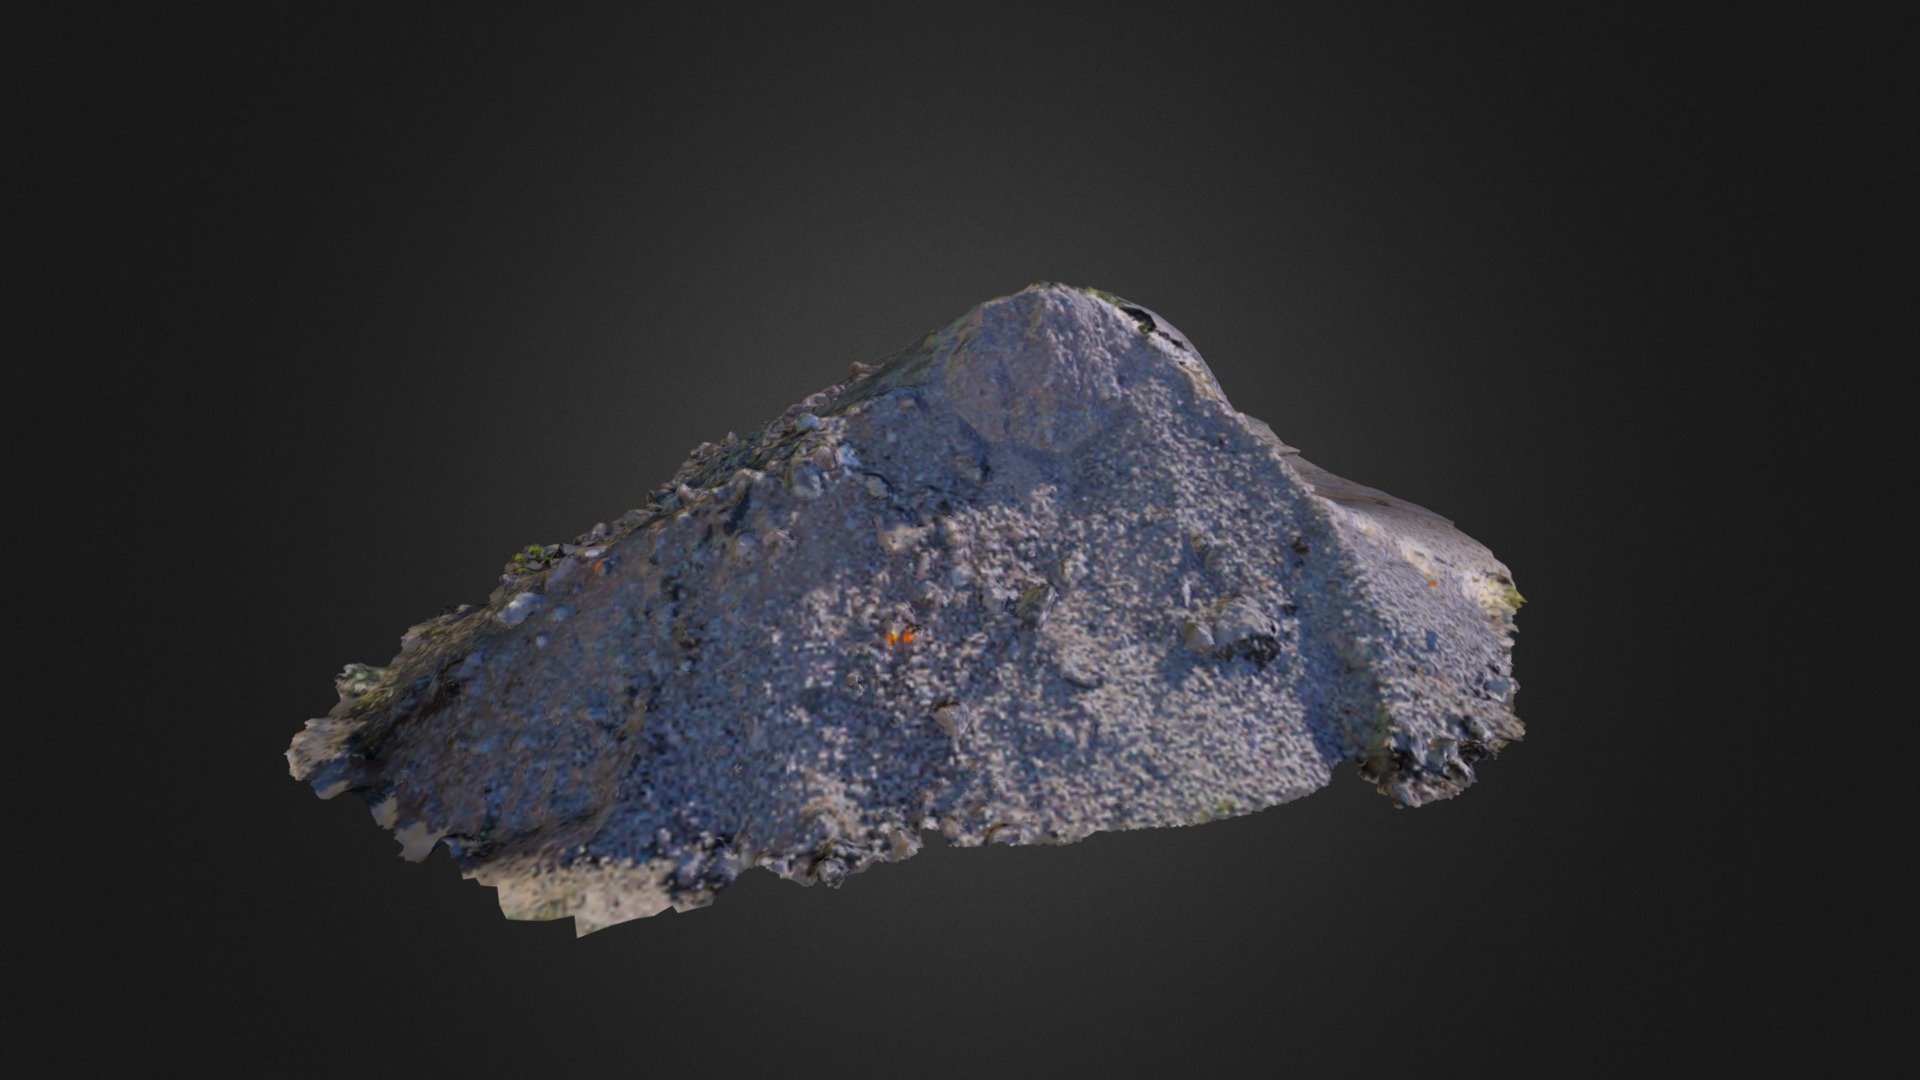 Calculated Volume: 7,225 m³ (actual)
Measured Volume: ≈7,3 m³ (desired)
Calculated Area: 21,42 m³ (actual)
Measured Area: ≈21 m³ (desired)

3D scanned and measured with Photomodeler Scanner &lsquo;14 - Mound of Earth - 3D model by budenlouie 3d model